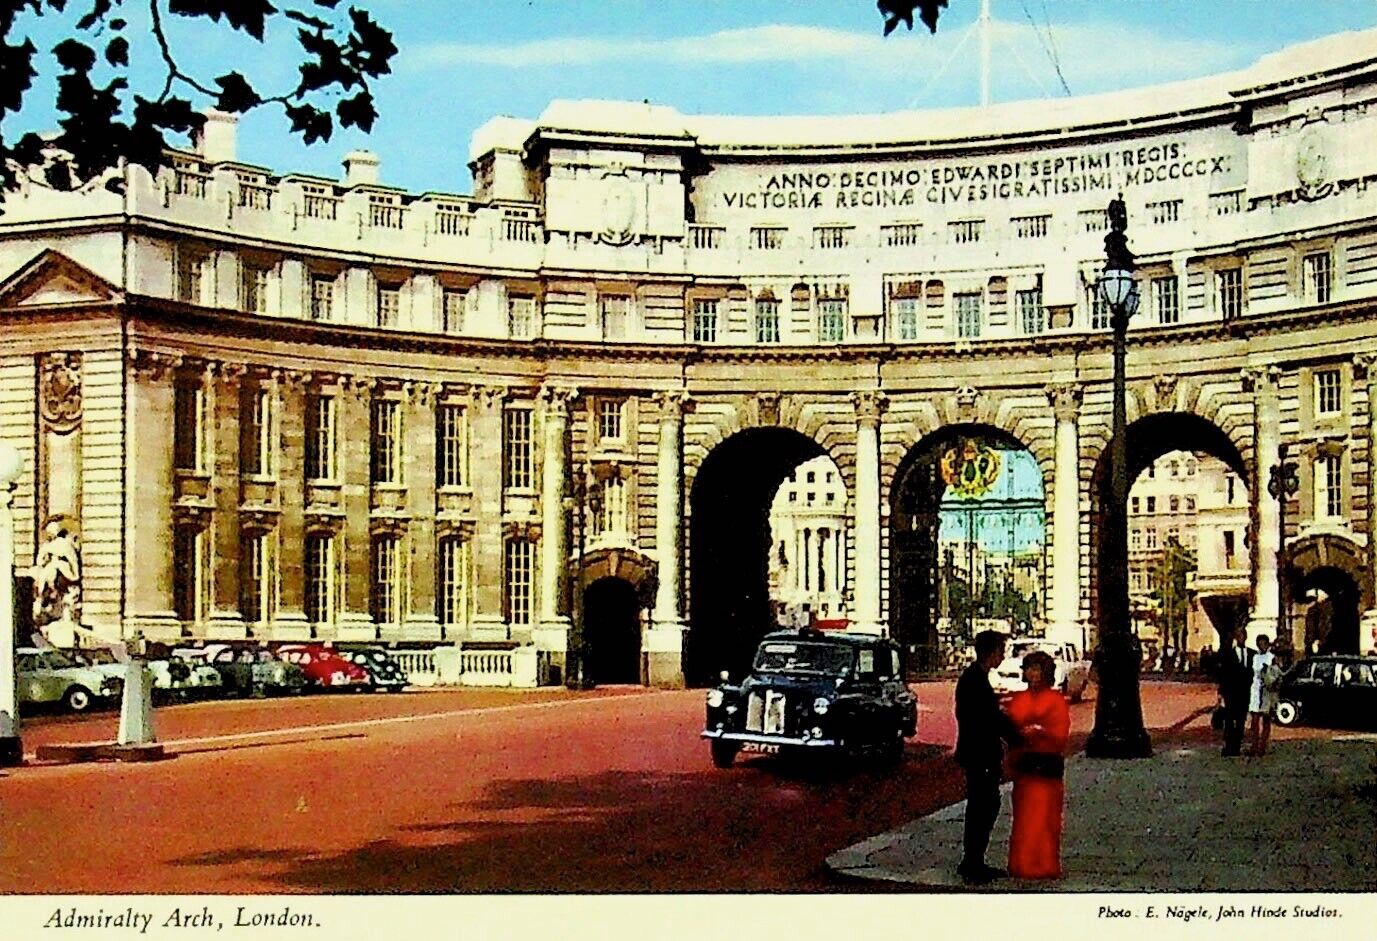 ADMIRALTY ARCH HISTORICAL PLACE LONDON, ENGLAND, - VINTAGE POSTCARD